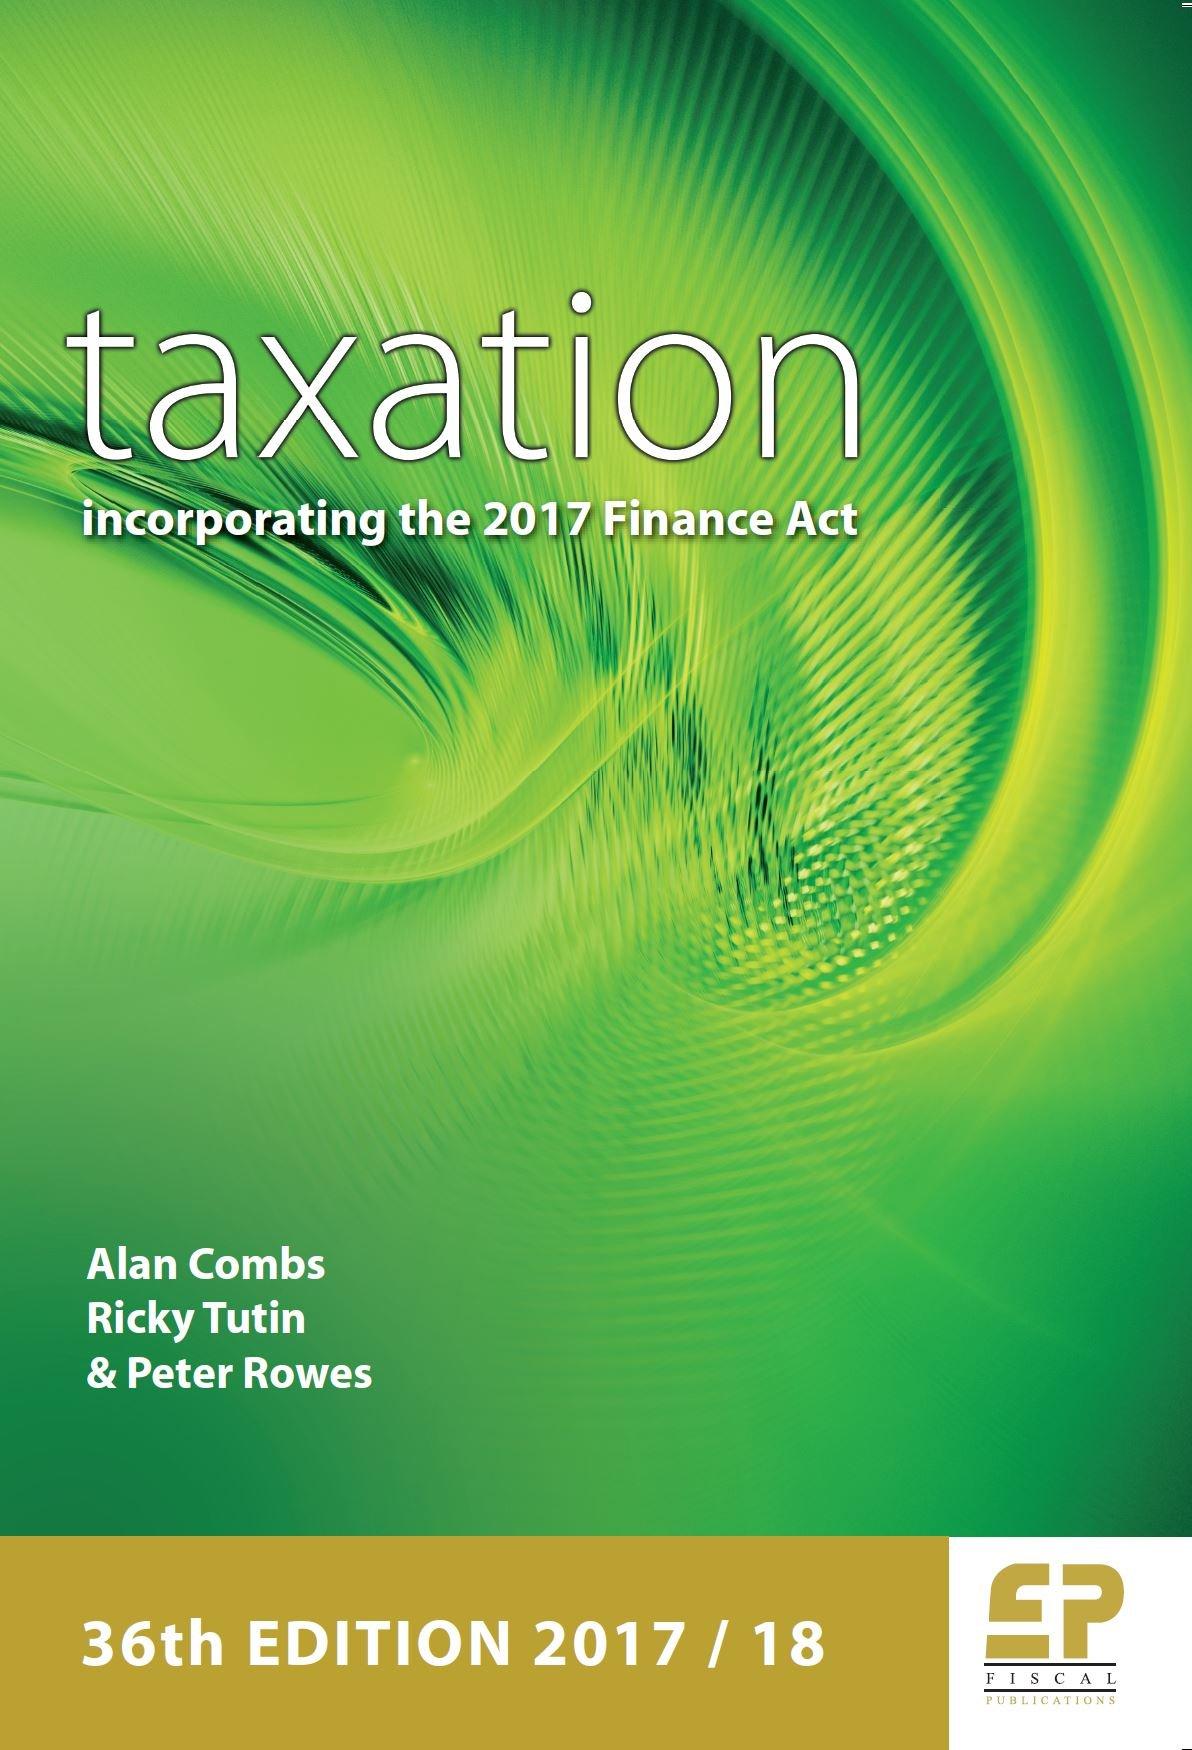 taxation incorporating the 2017 finance act 36th edition alan combs, ricky tutin, peter rowes 190620134x,